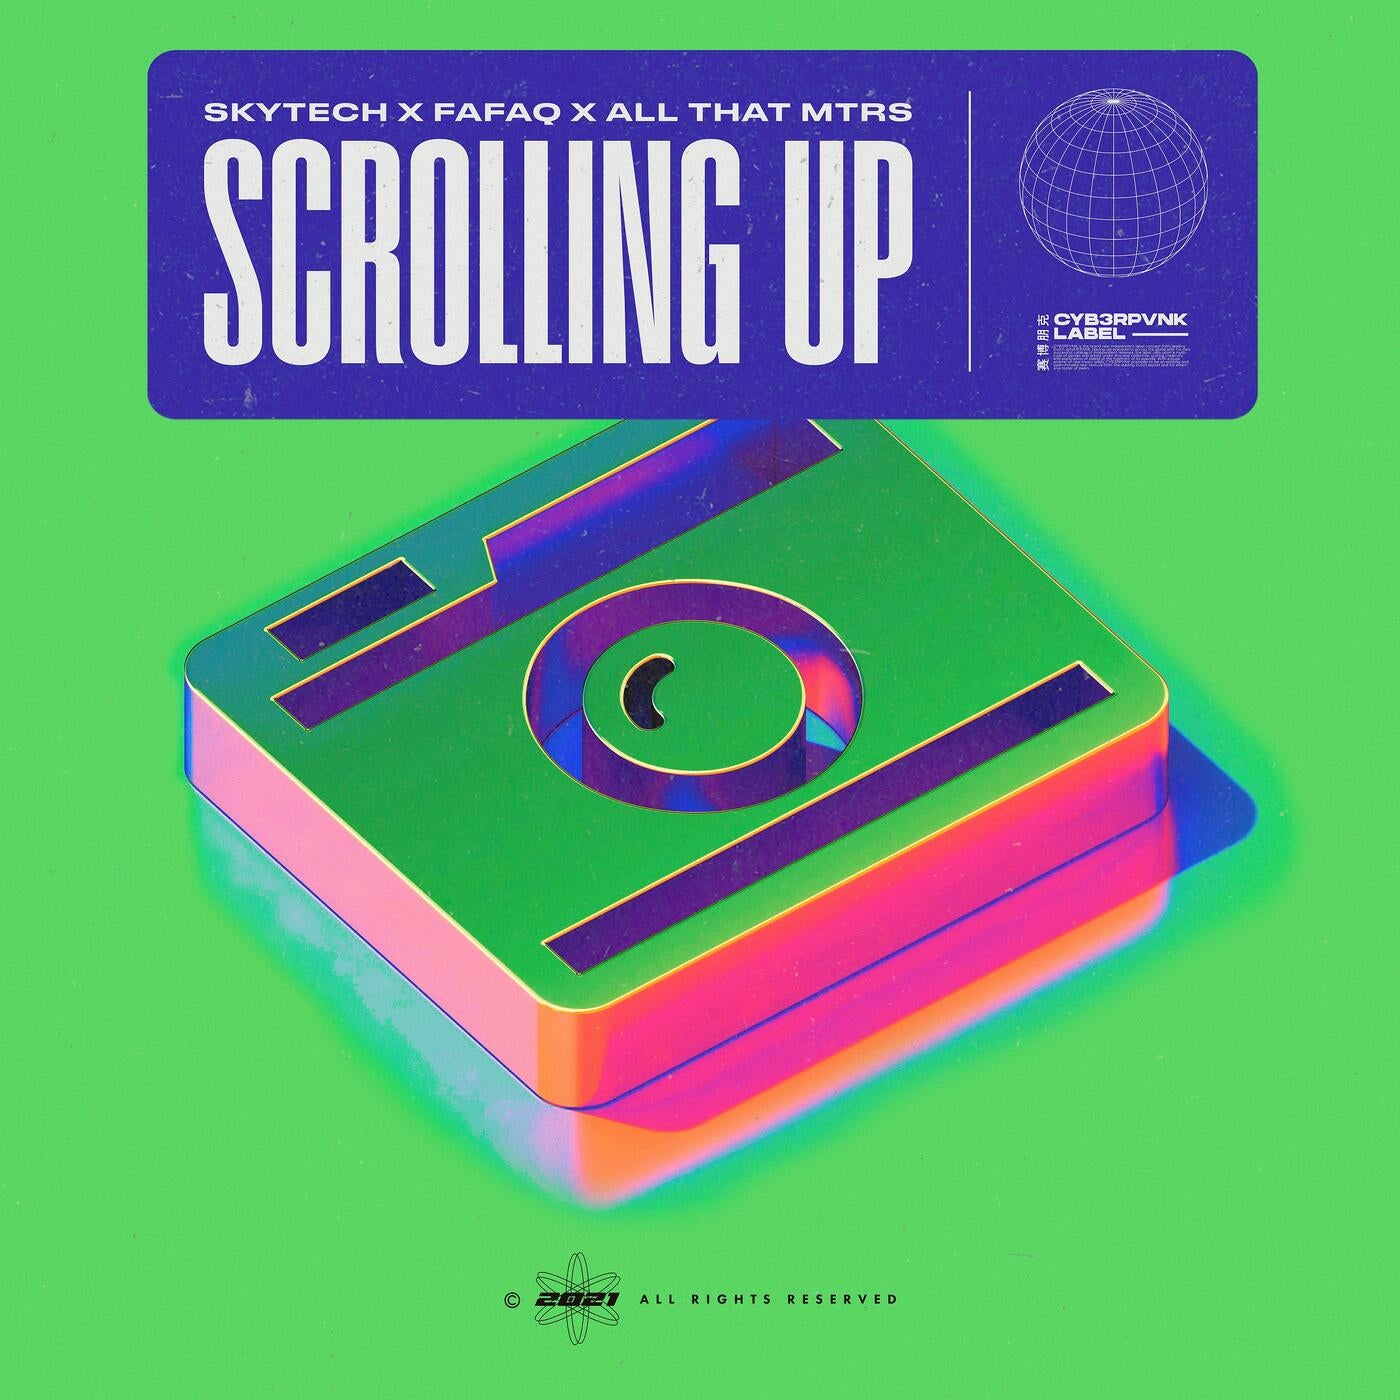 Skytech, Fafaq, All That MTRS – Scrolling Up (Extended Version) [CY19282]